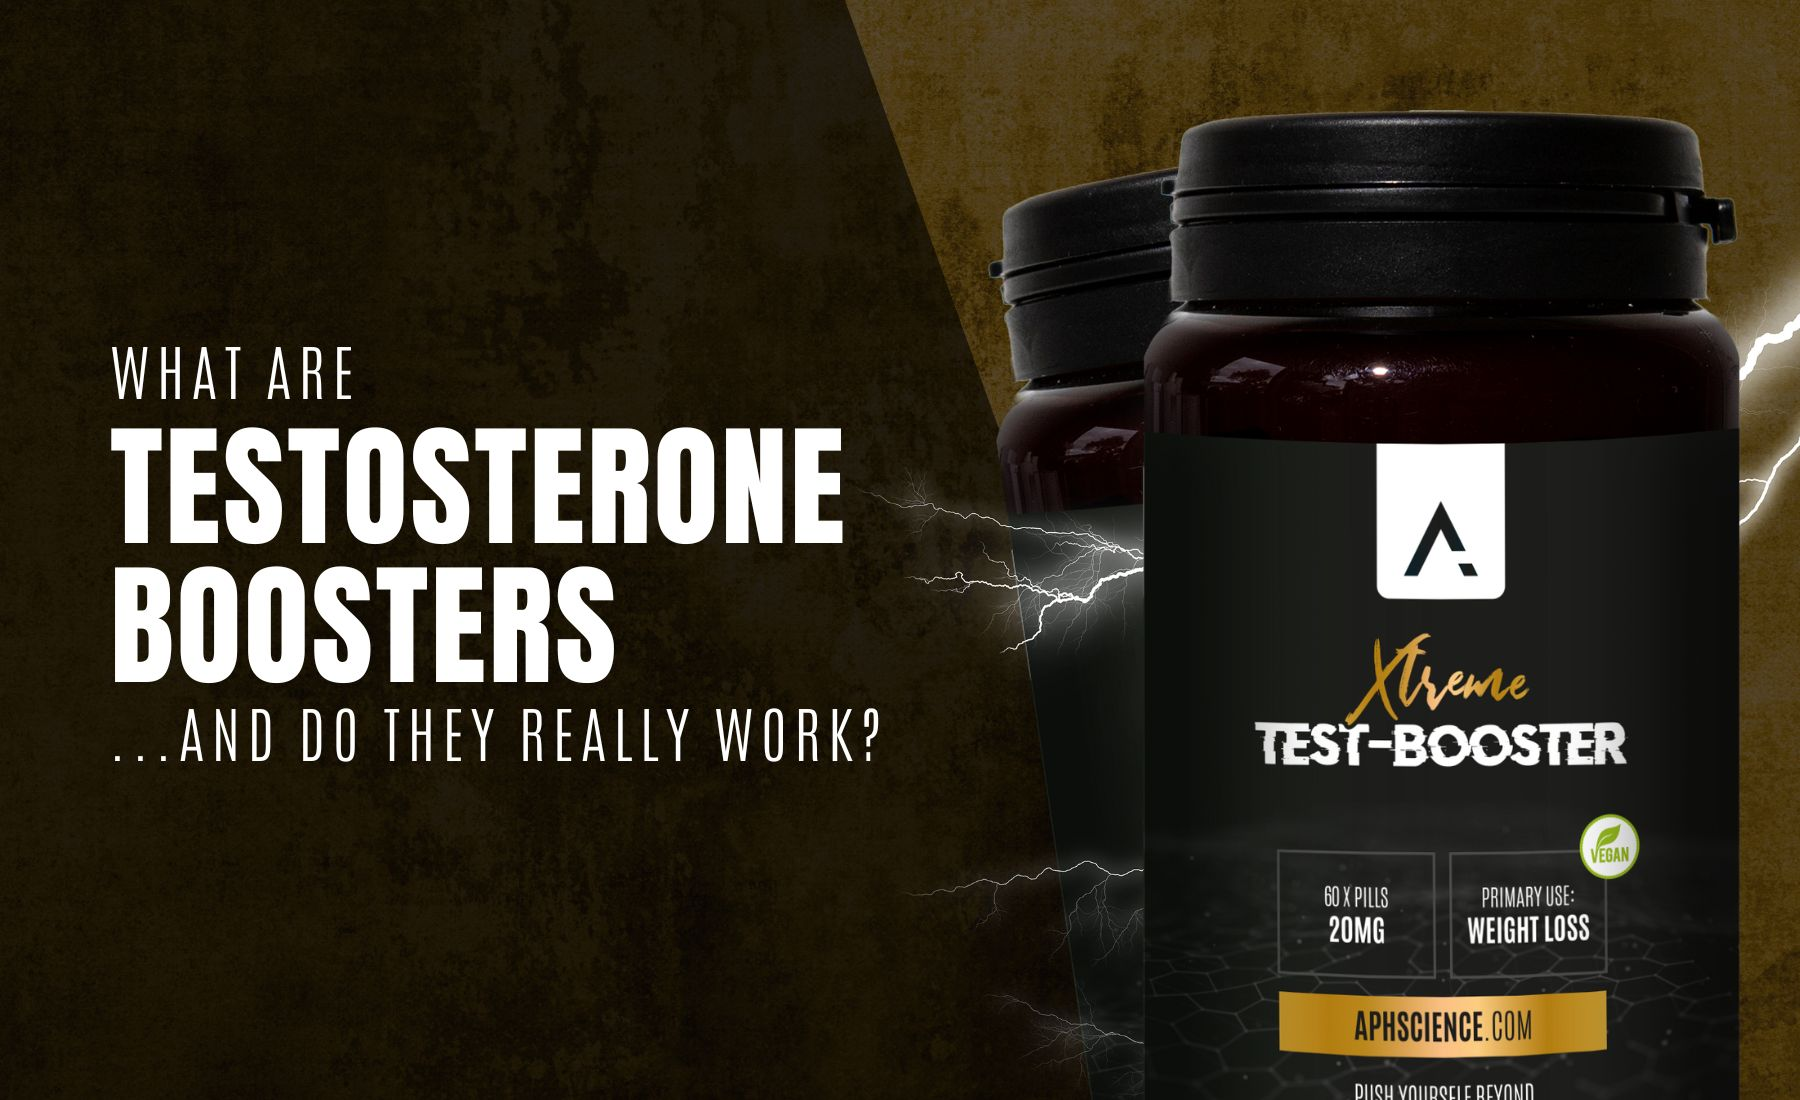 What are testosterone boosters and do they really work?